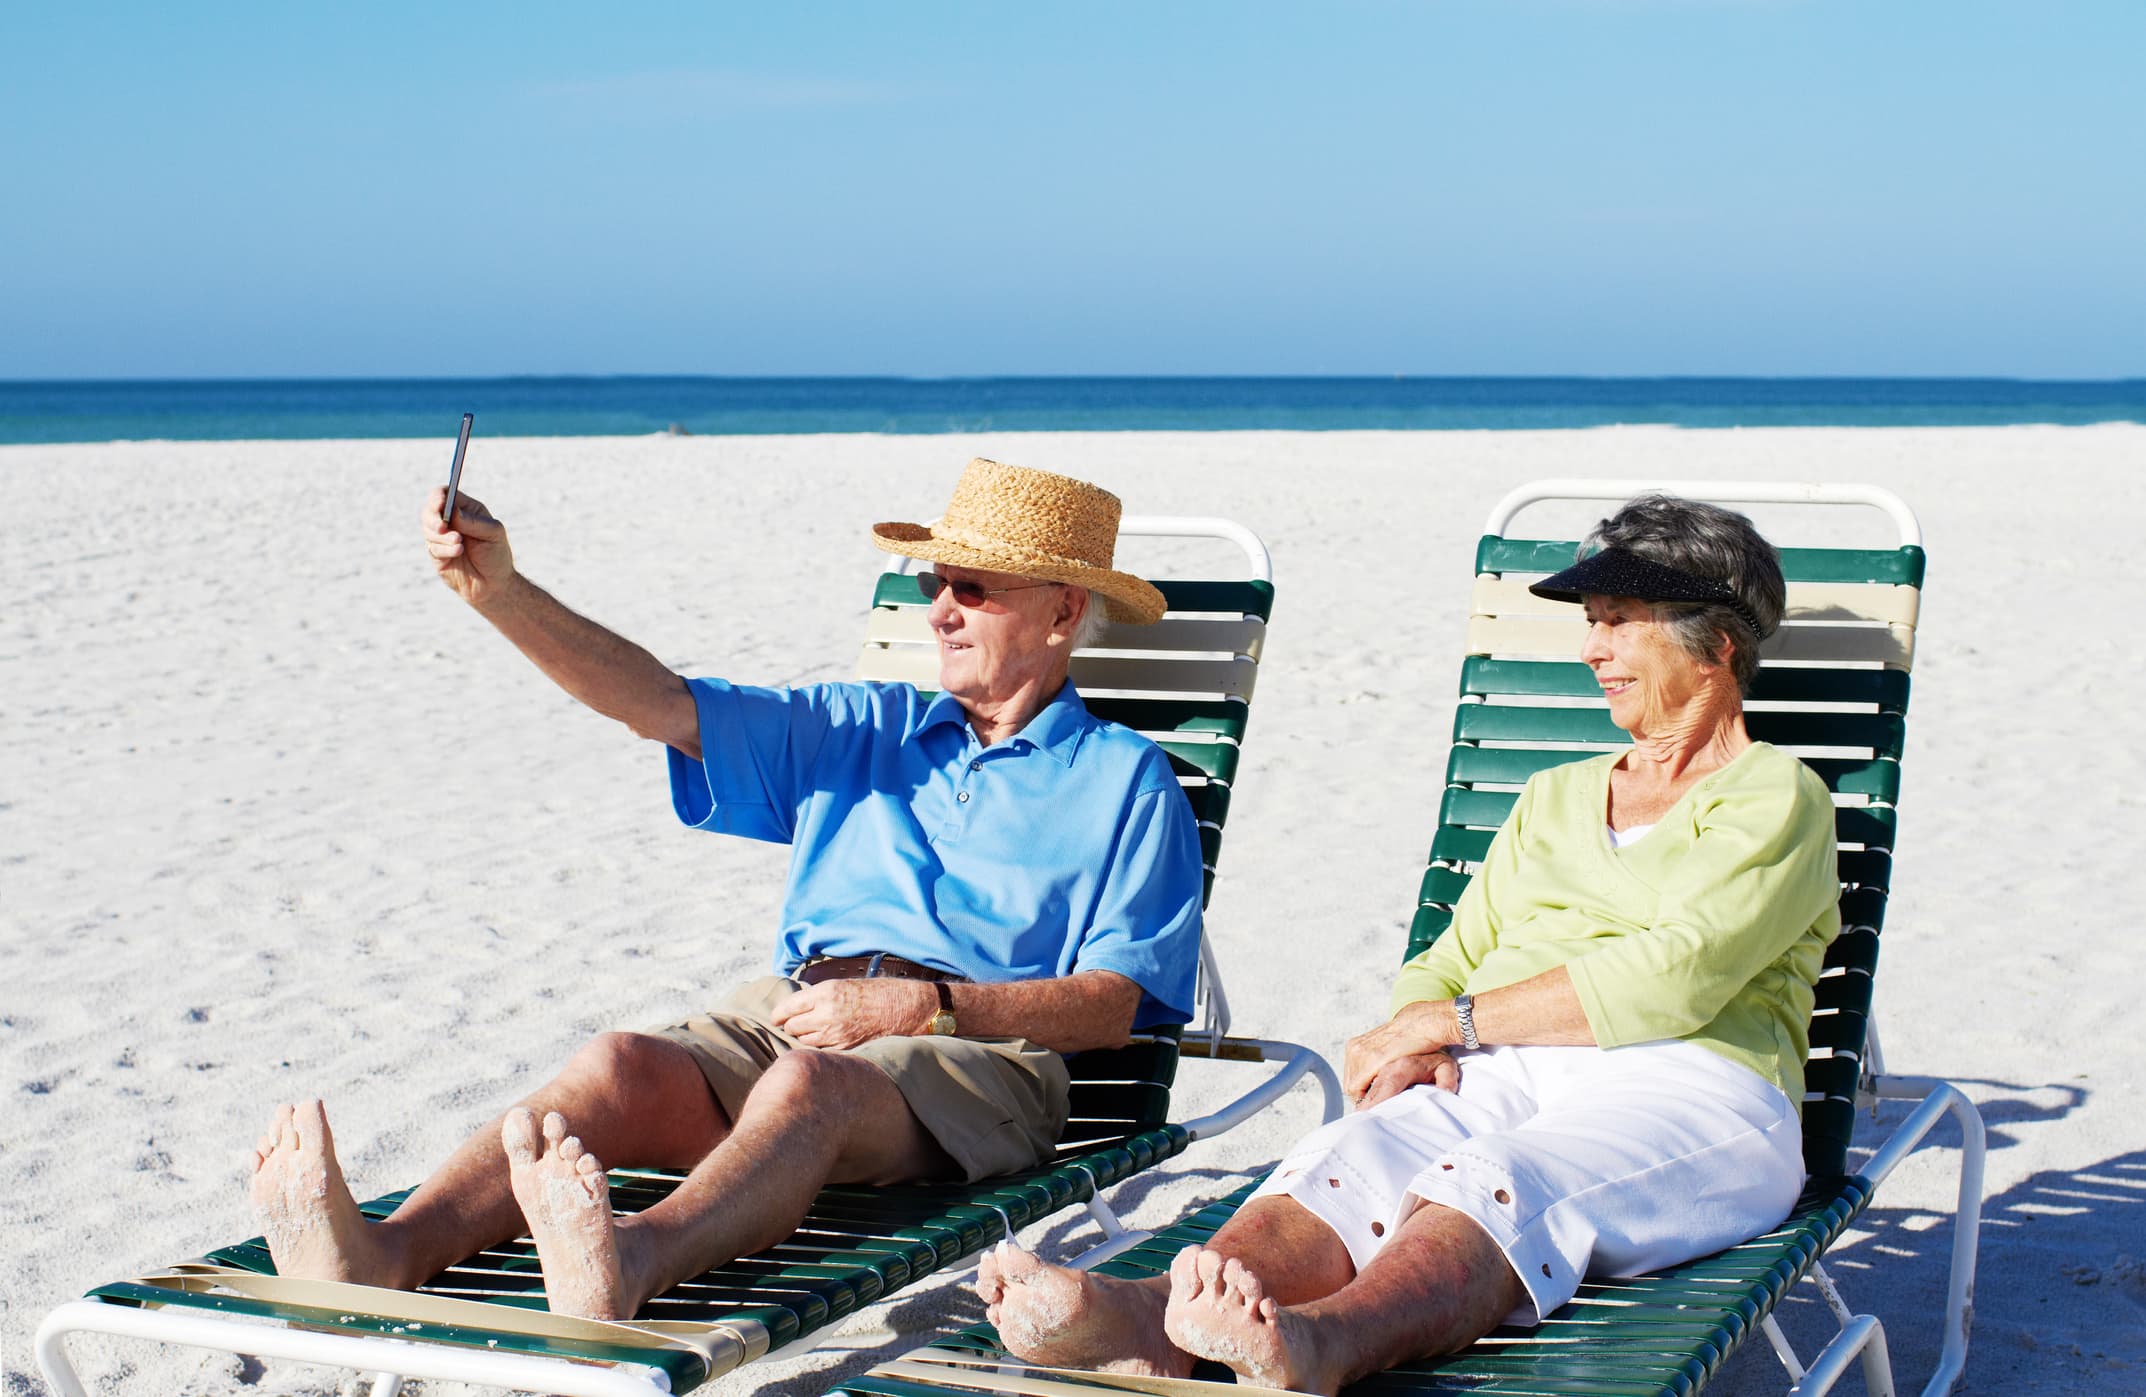 20 of the 20 most affordable retirement spots are in Florida